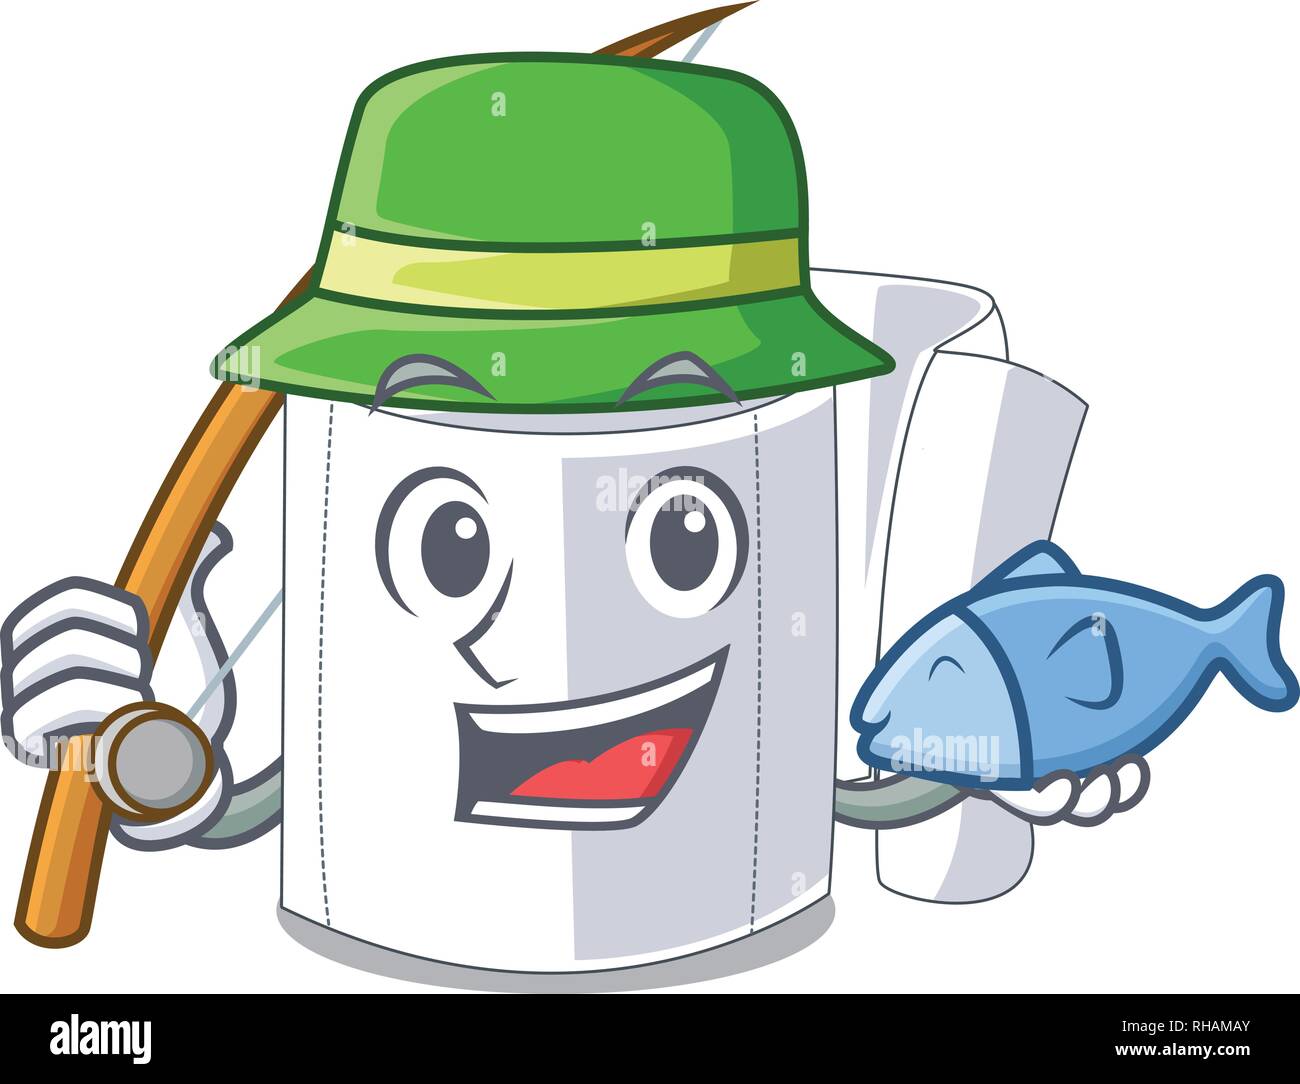 Fishing toilet paper in shape of mascot Stock Vector